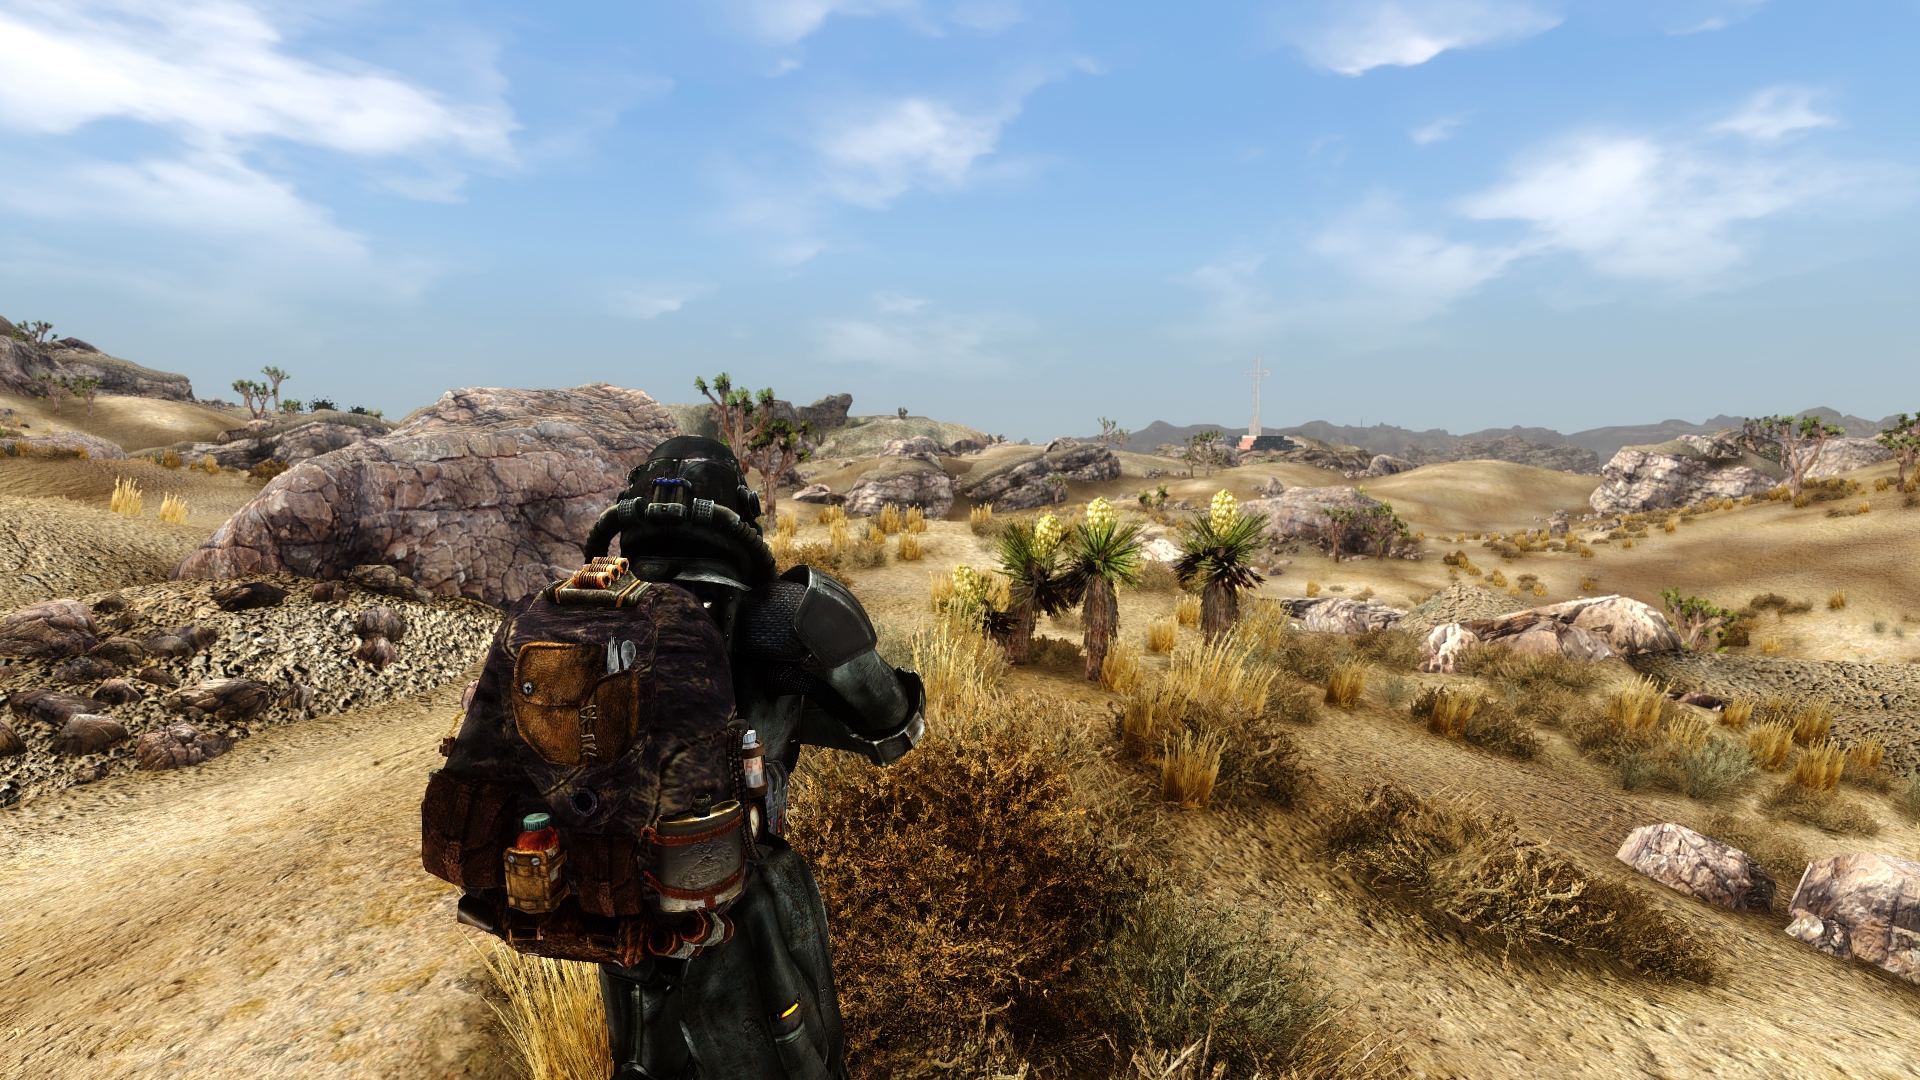 Fallout new enb. Фоллаут Нью Вегас ENB. Fallout New Vegas ENB. Фоллаут New Vegas Desert ENB. Фоллаут Нью Вегас ЕНБ.